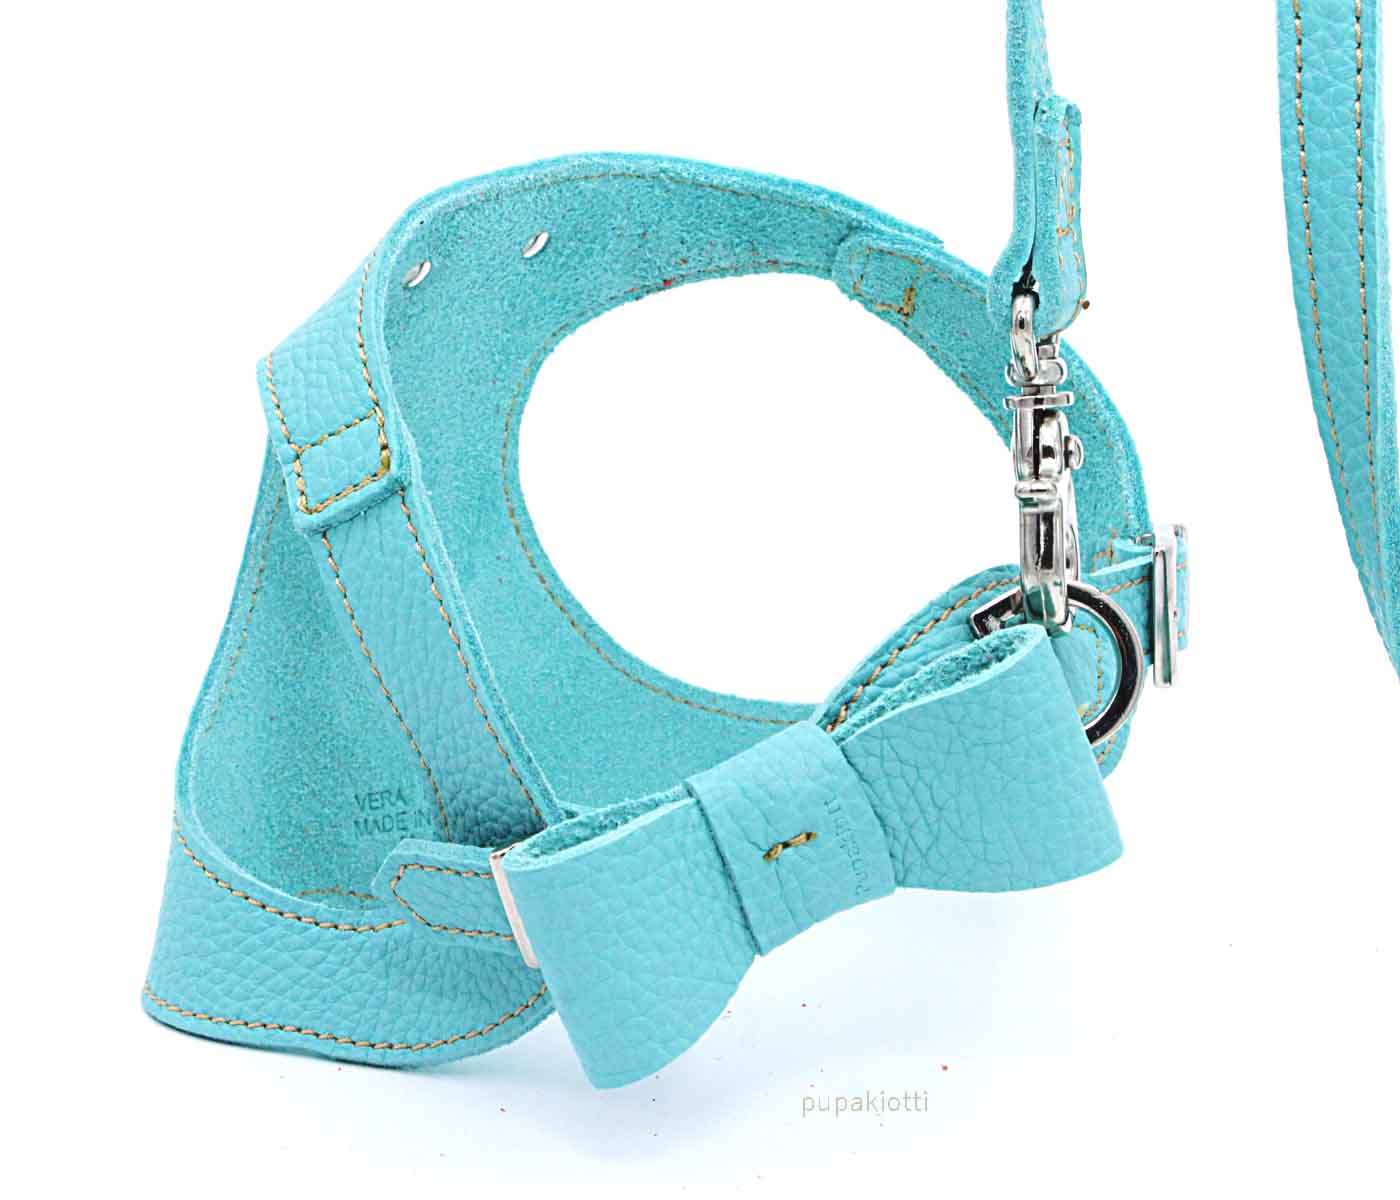 Basic. Set 3 pcs. Leather harness and leash with waste bags dispenser